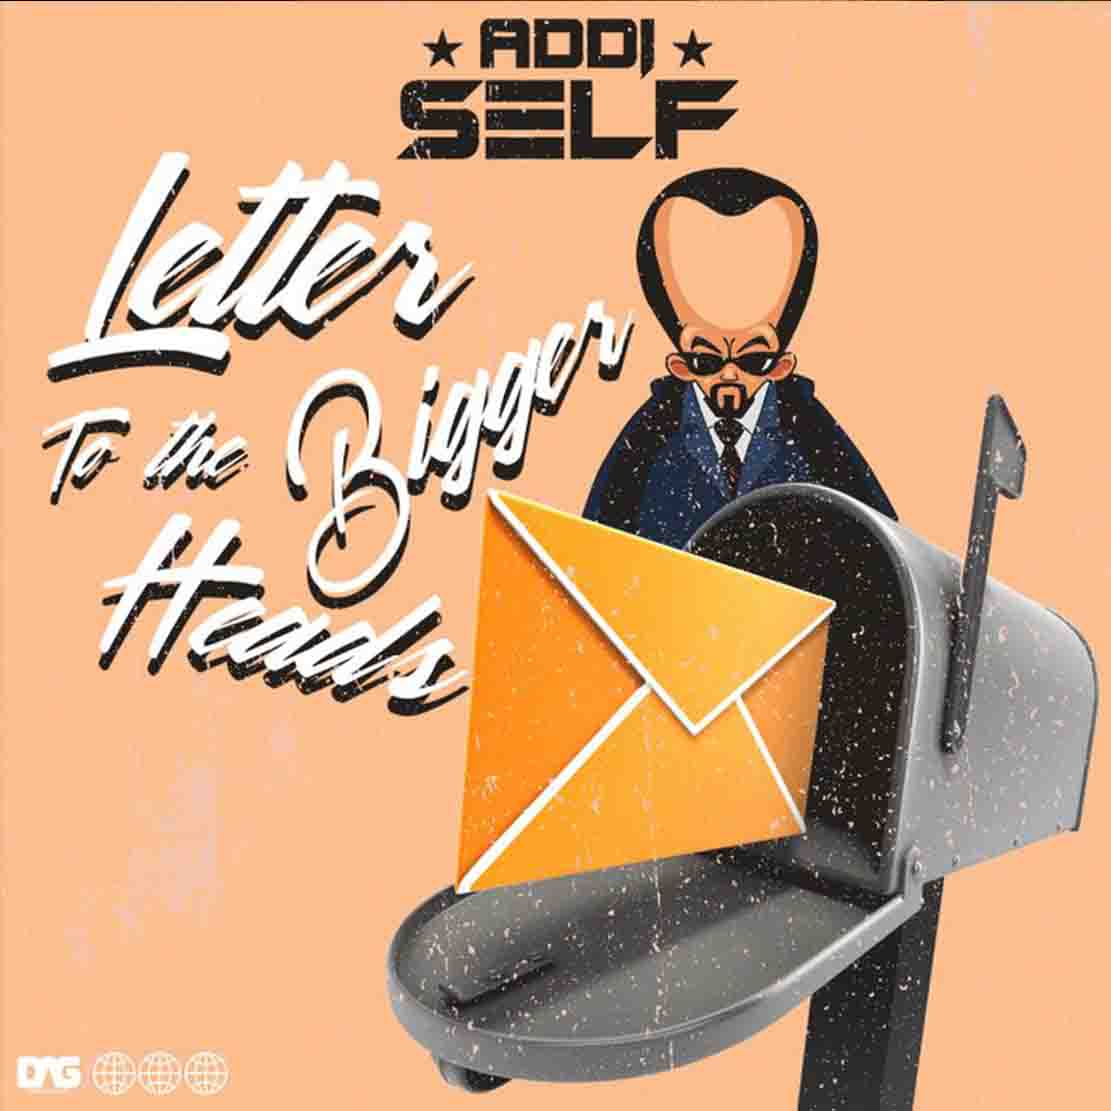 Addi Self - Letter To The Bigger Heads (Ghana Mp3 Download)